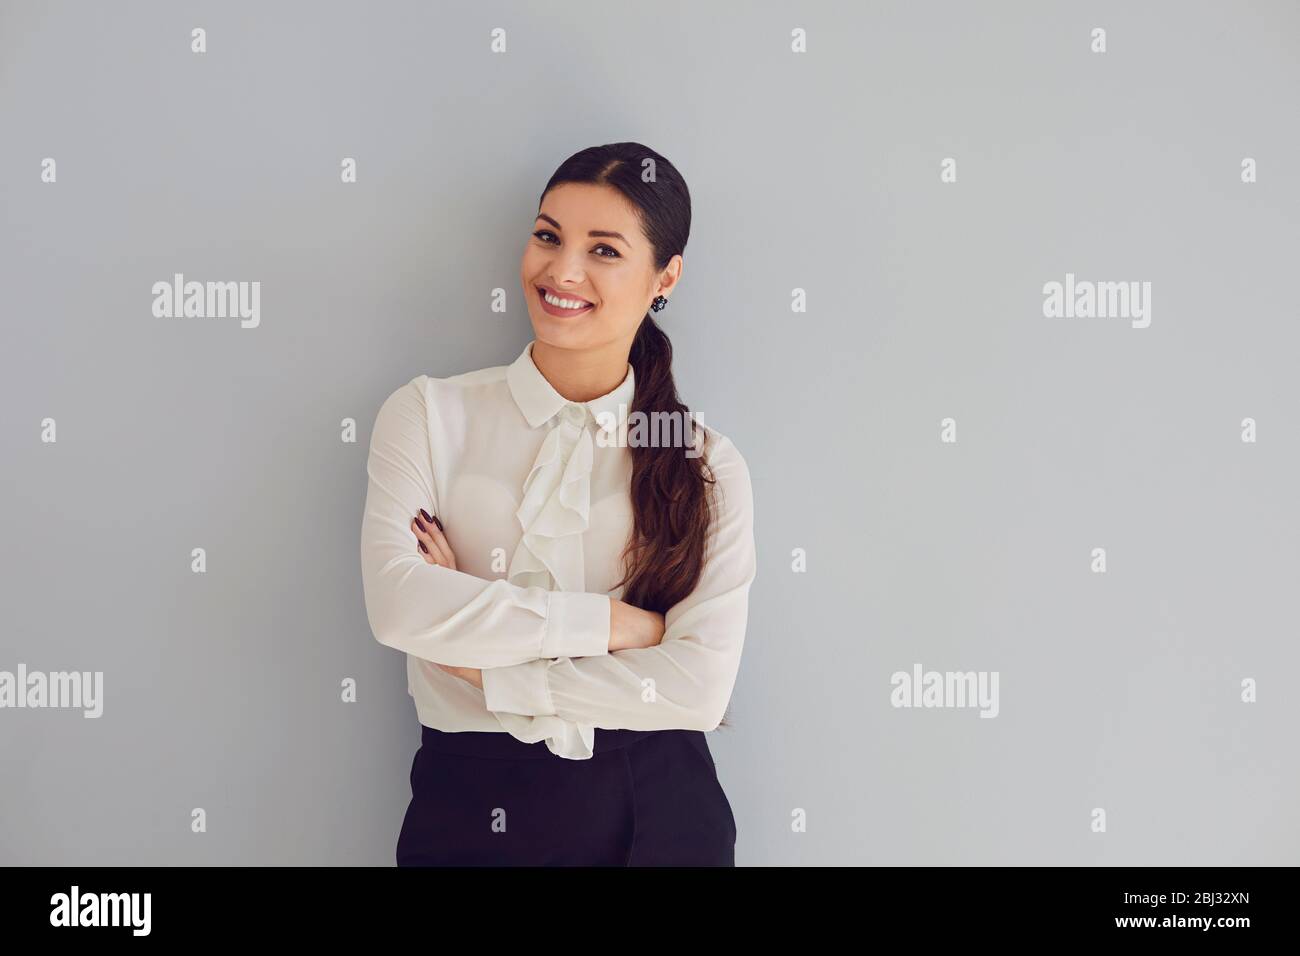 Young woman in white shirt smiling laughs joyful happy positive on a gray background. Stock Photo